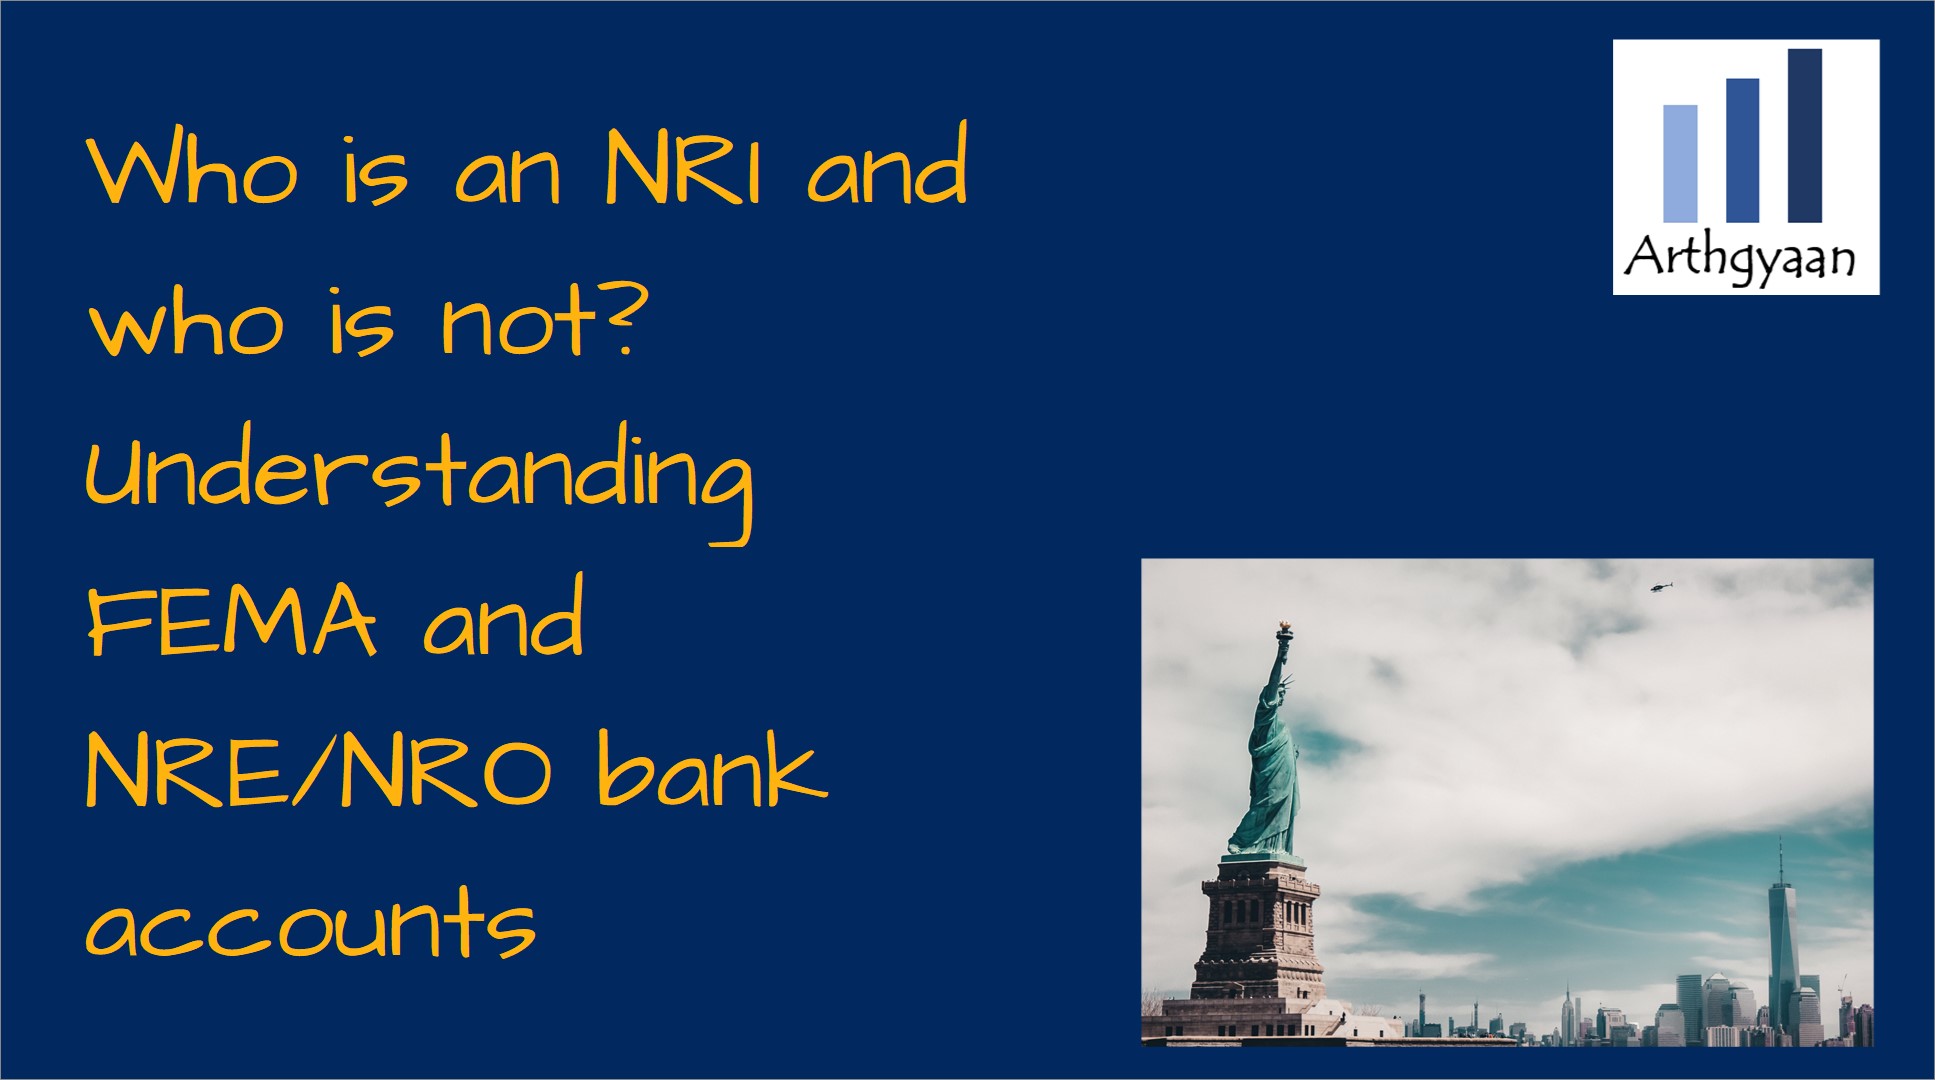 Who is an NRI and who is not? Understanding FEMA and NRE/NRO bank accounts